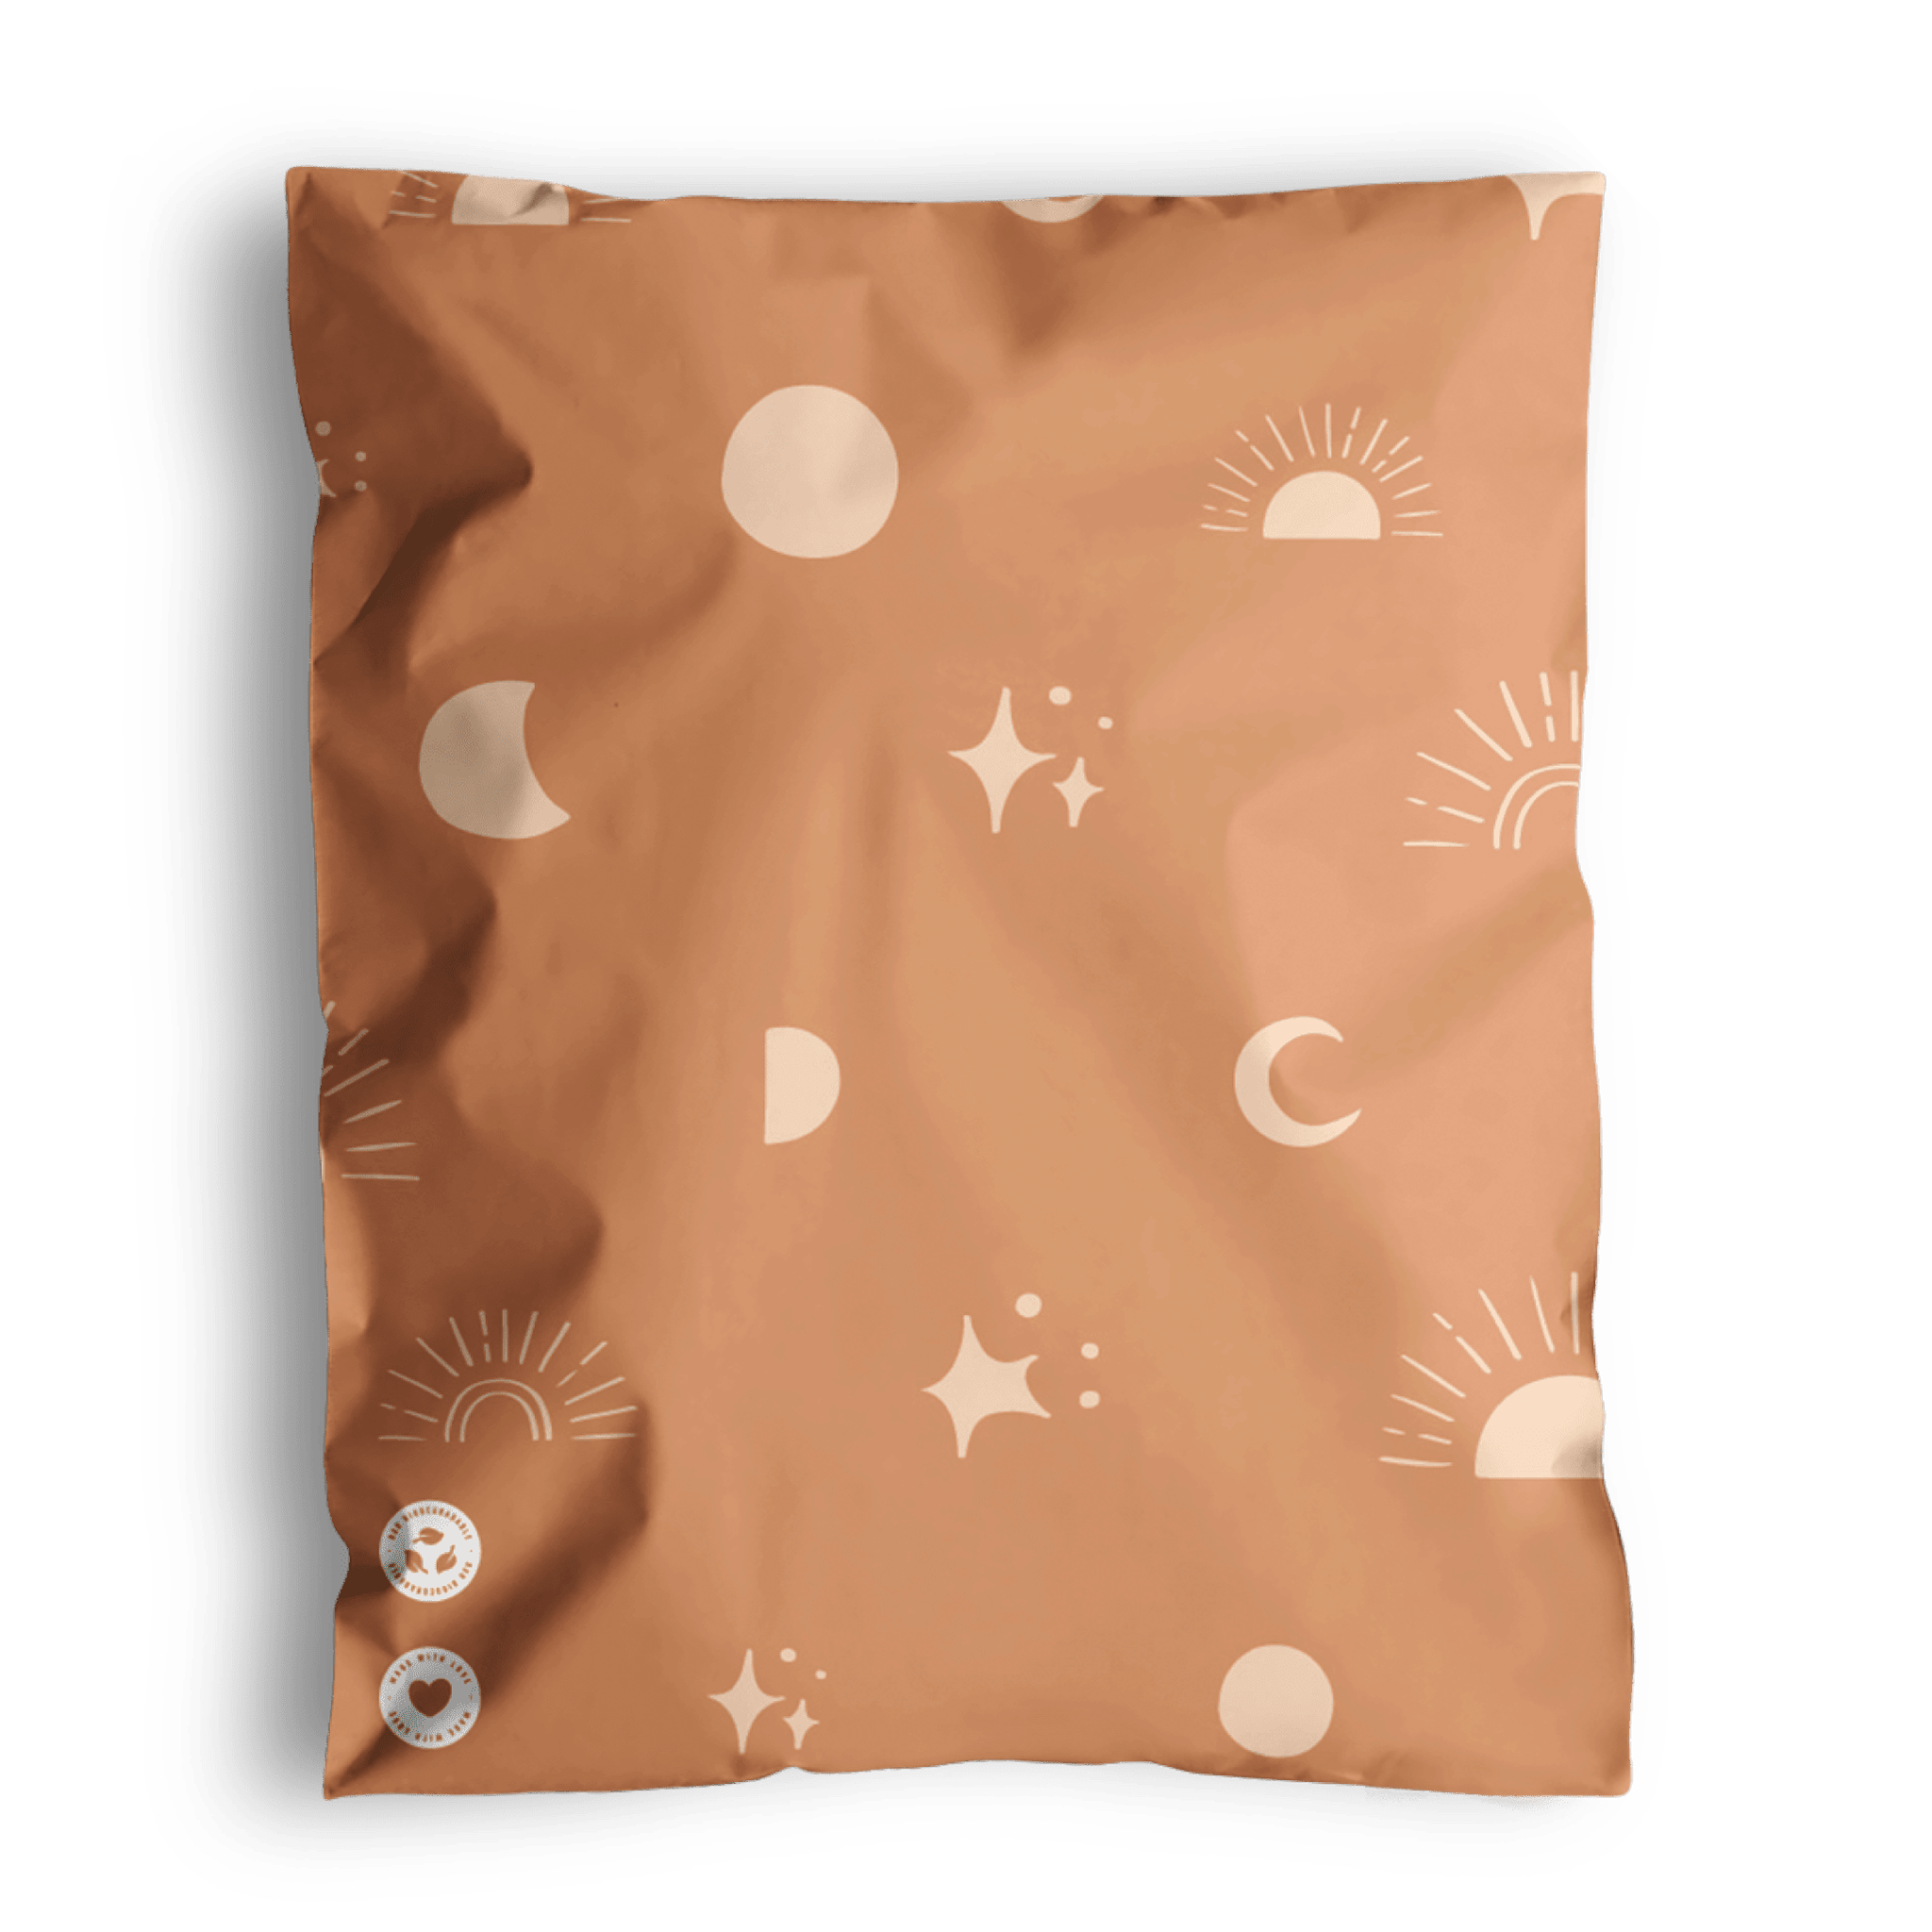 A patterned cushion with Celestial Tan Mailers 10" x 13" designs on a recyclable background from impack.co.